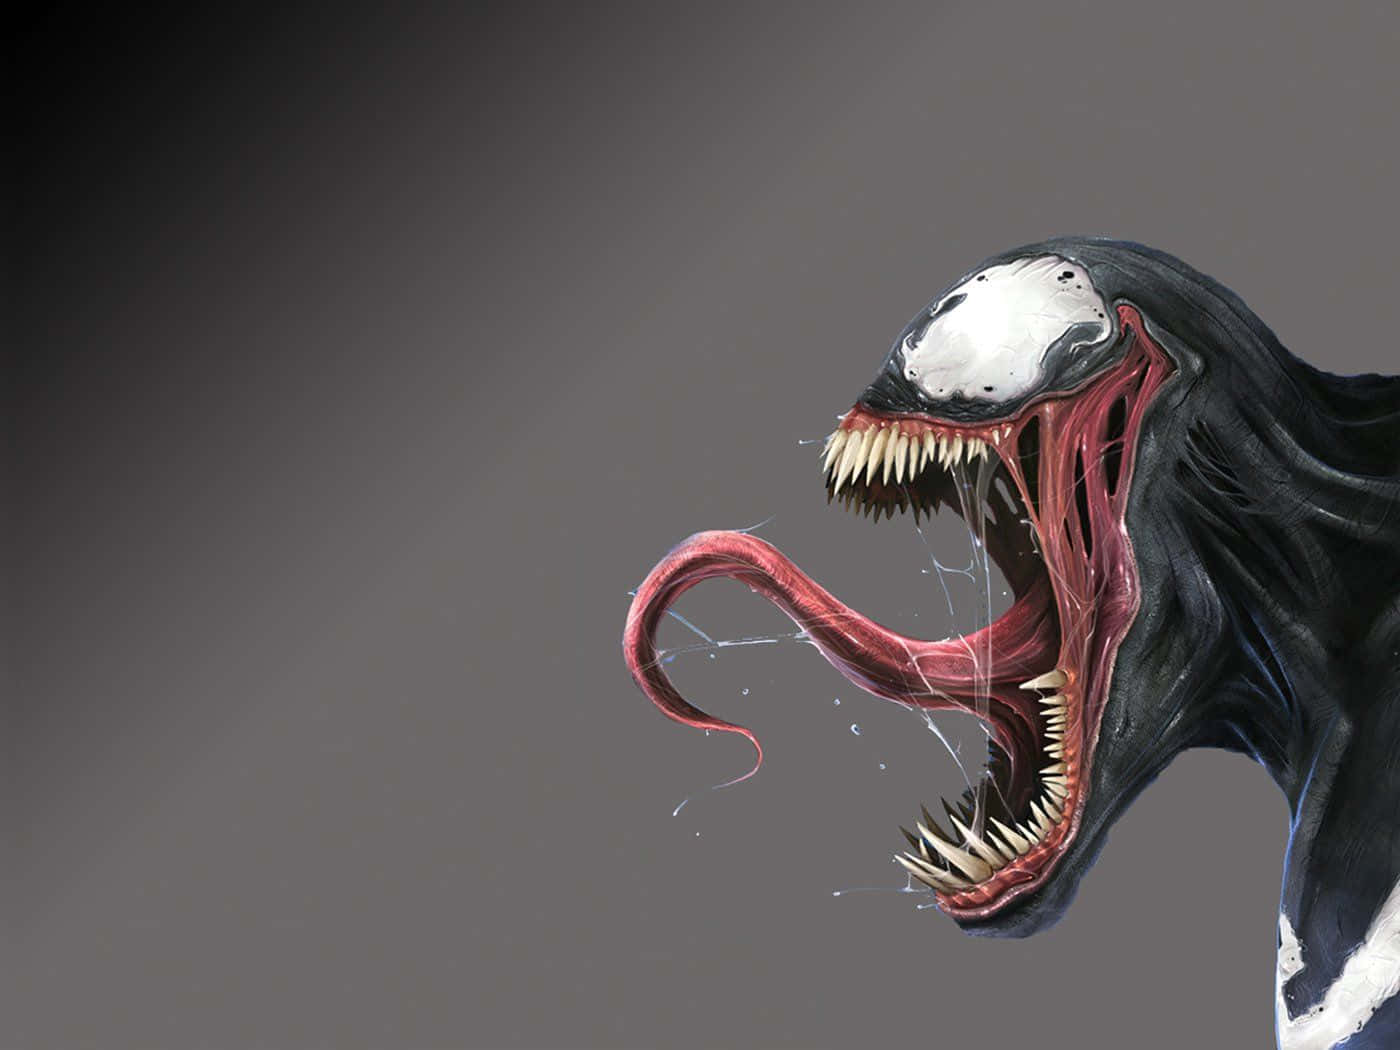 "Stand ready to unleash your terrifying inner Venom!"